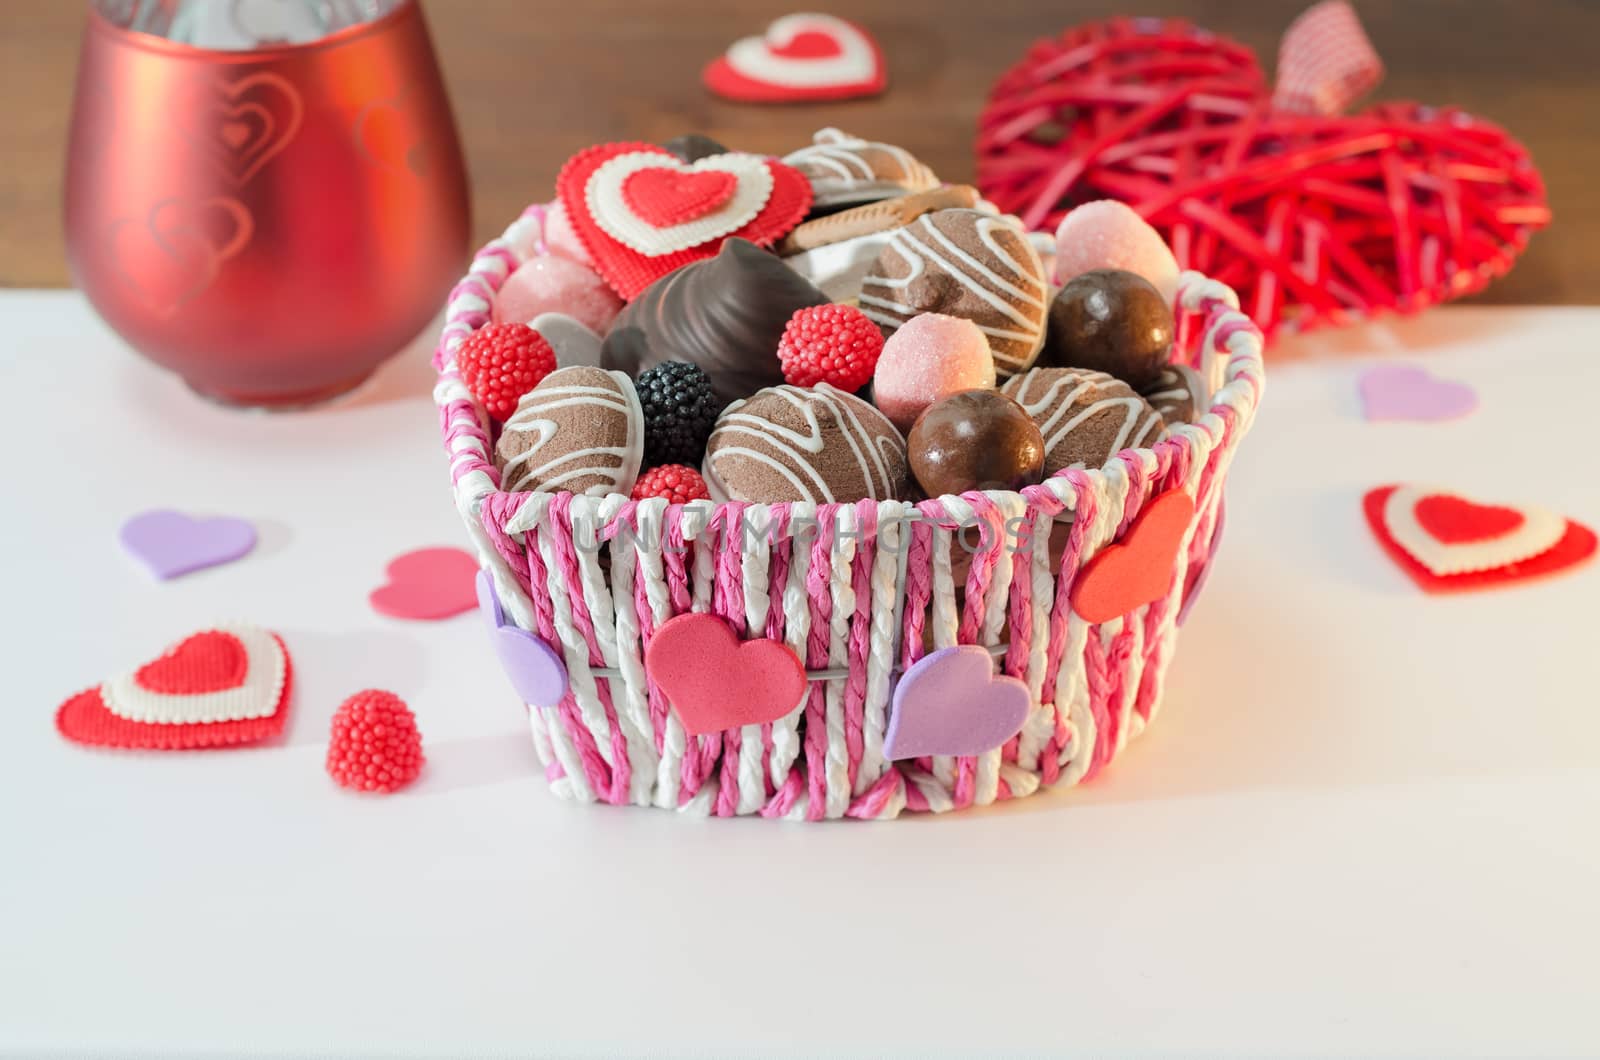 Sweets and decorative Valentines Day heart basket by Gaina